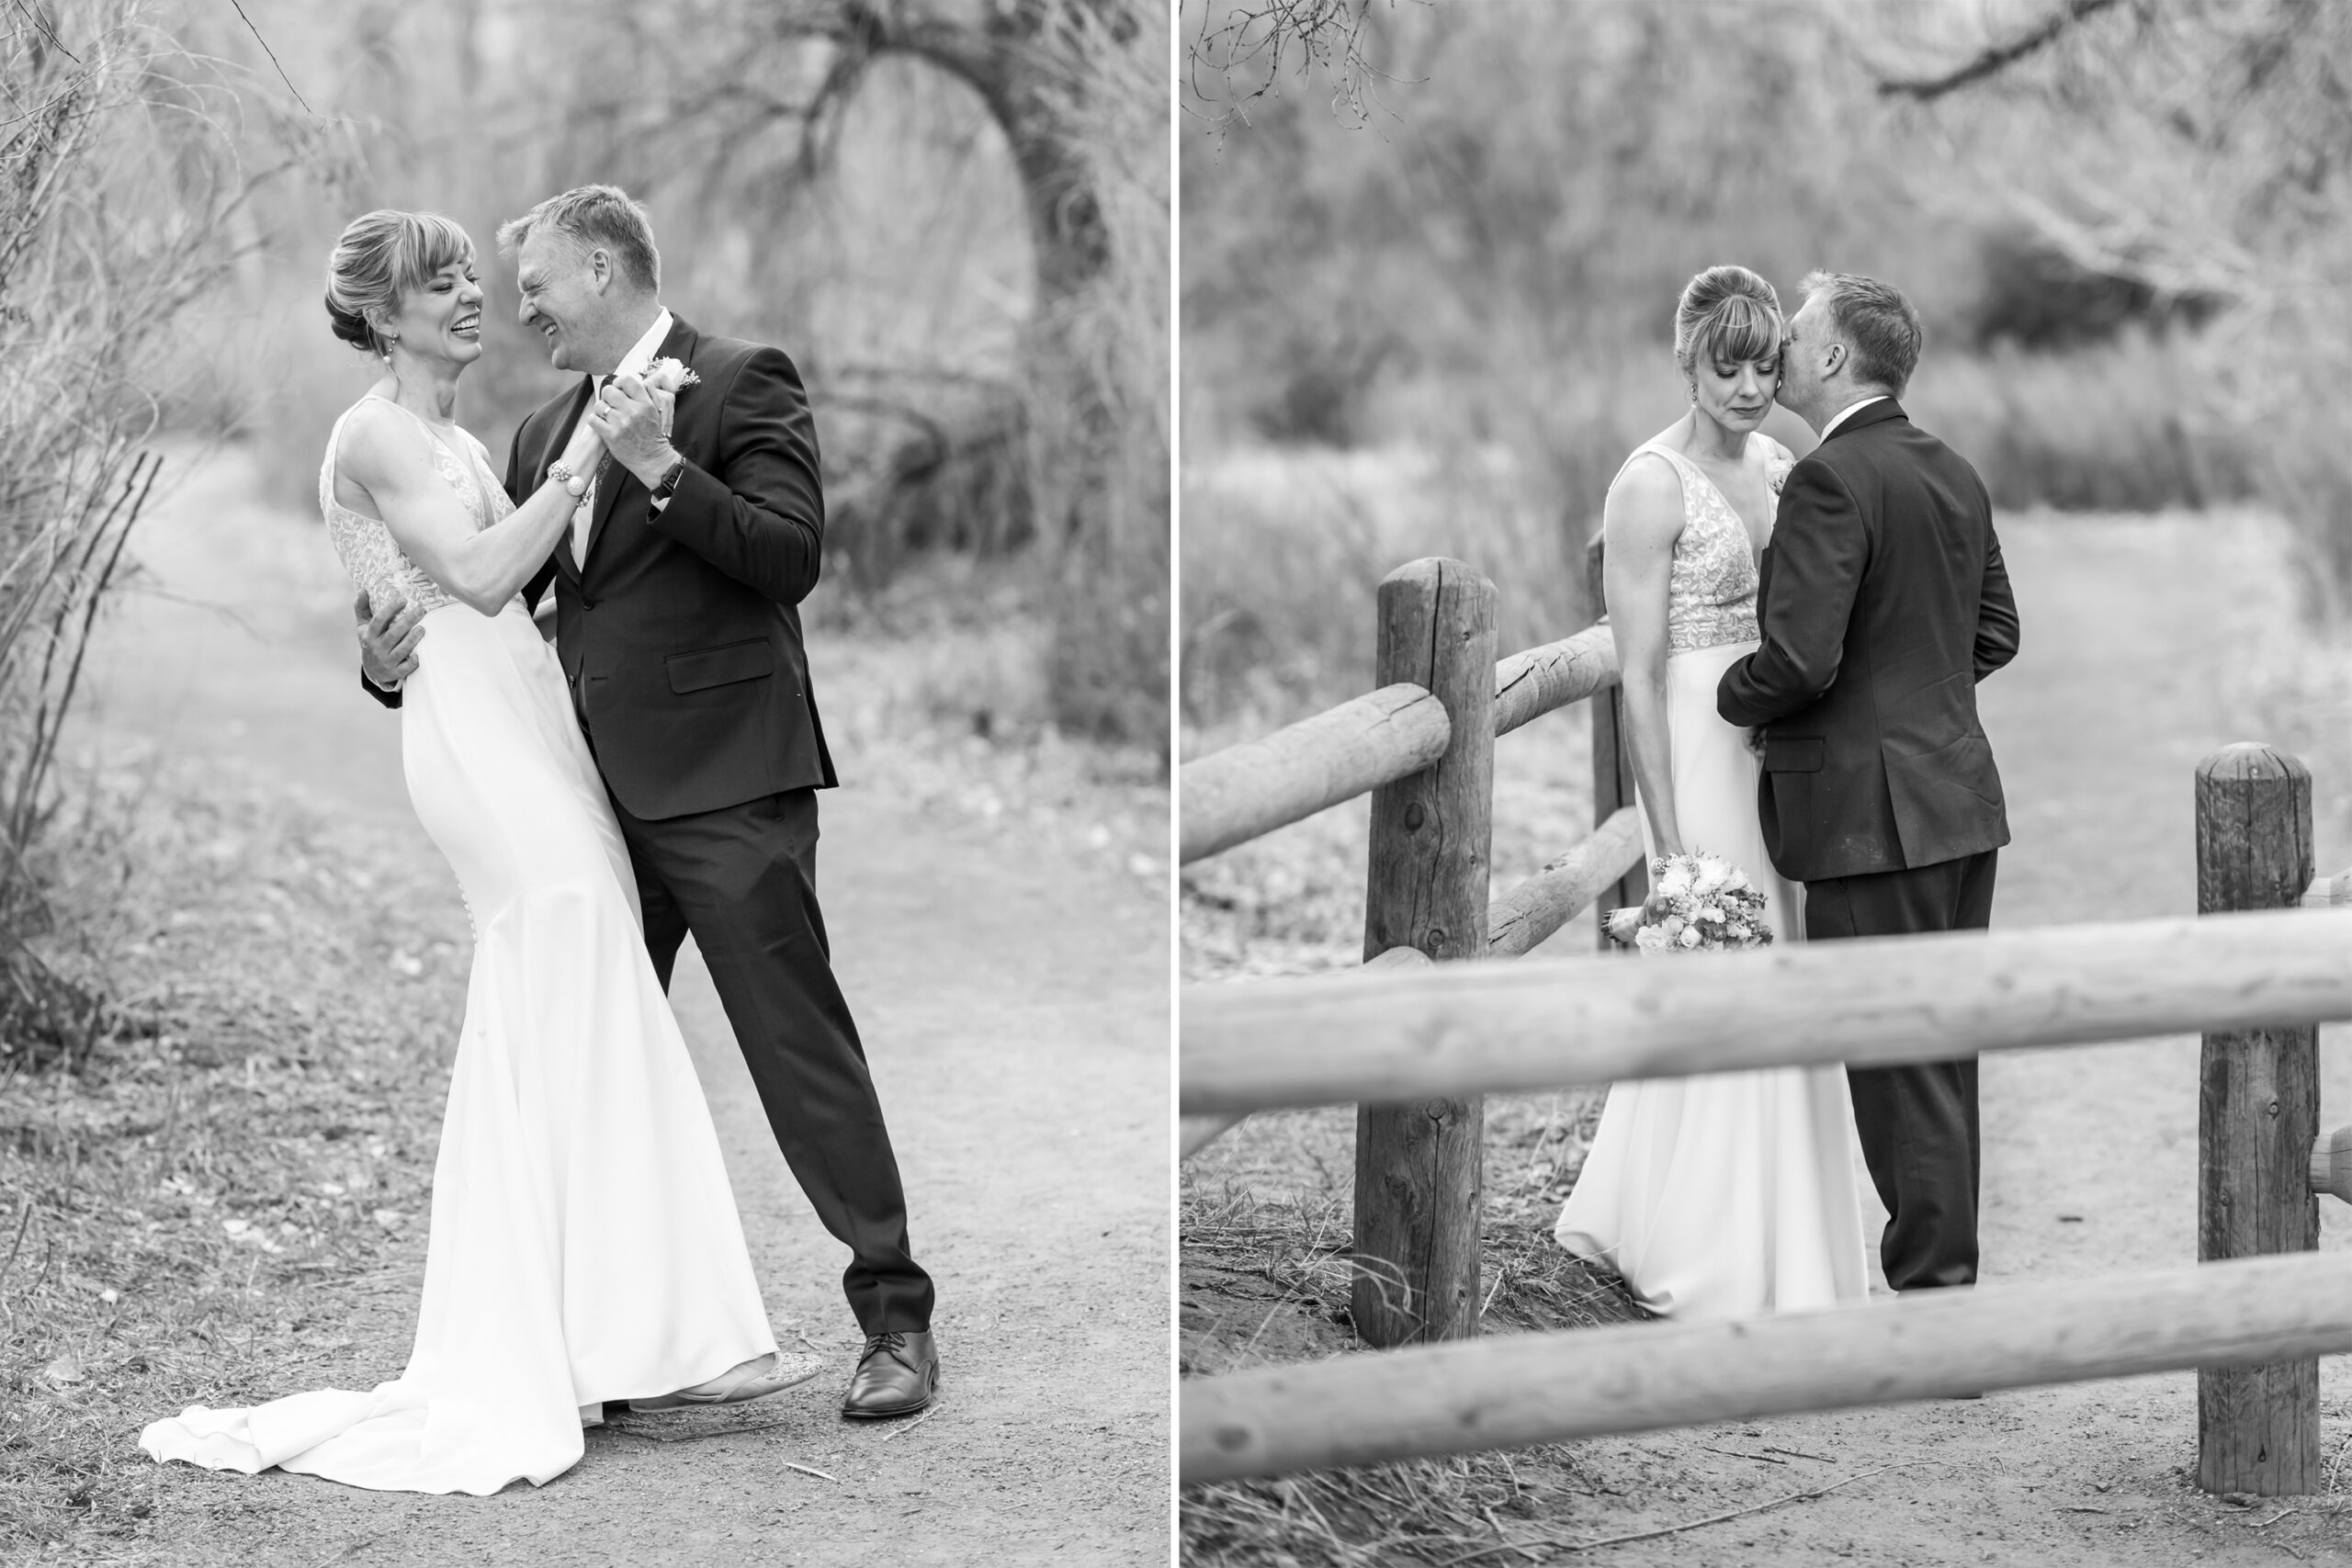 The bride and groom pose for couples photos at Cherry Creek State Park outside of Denver, Colorado.